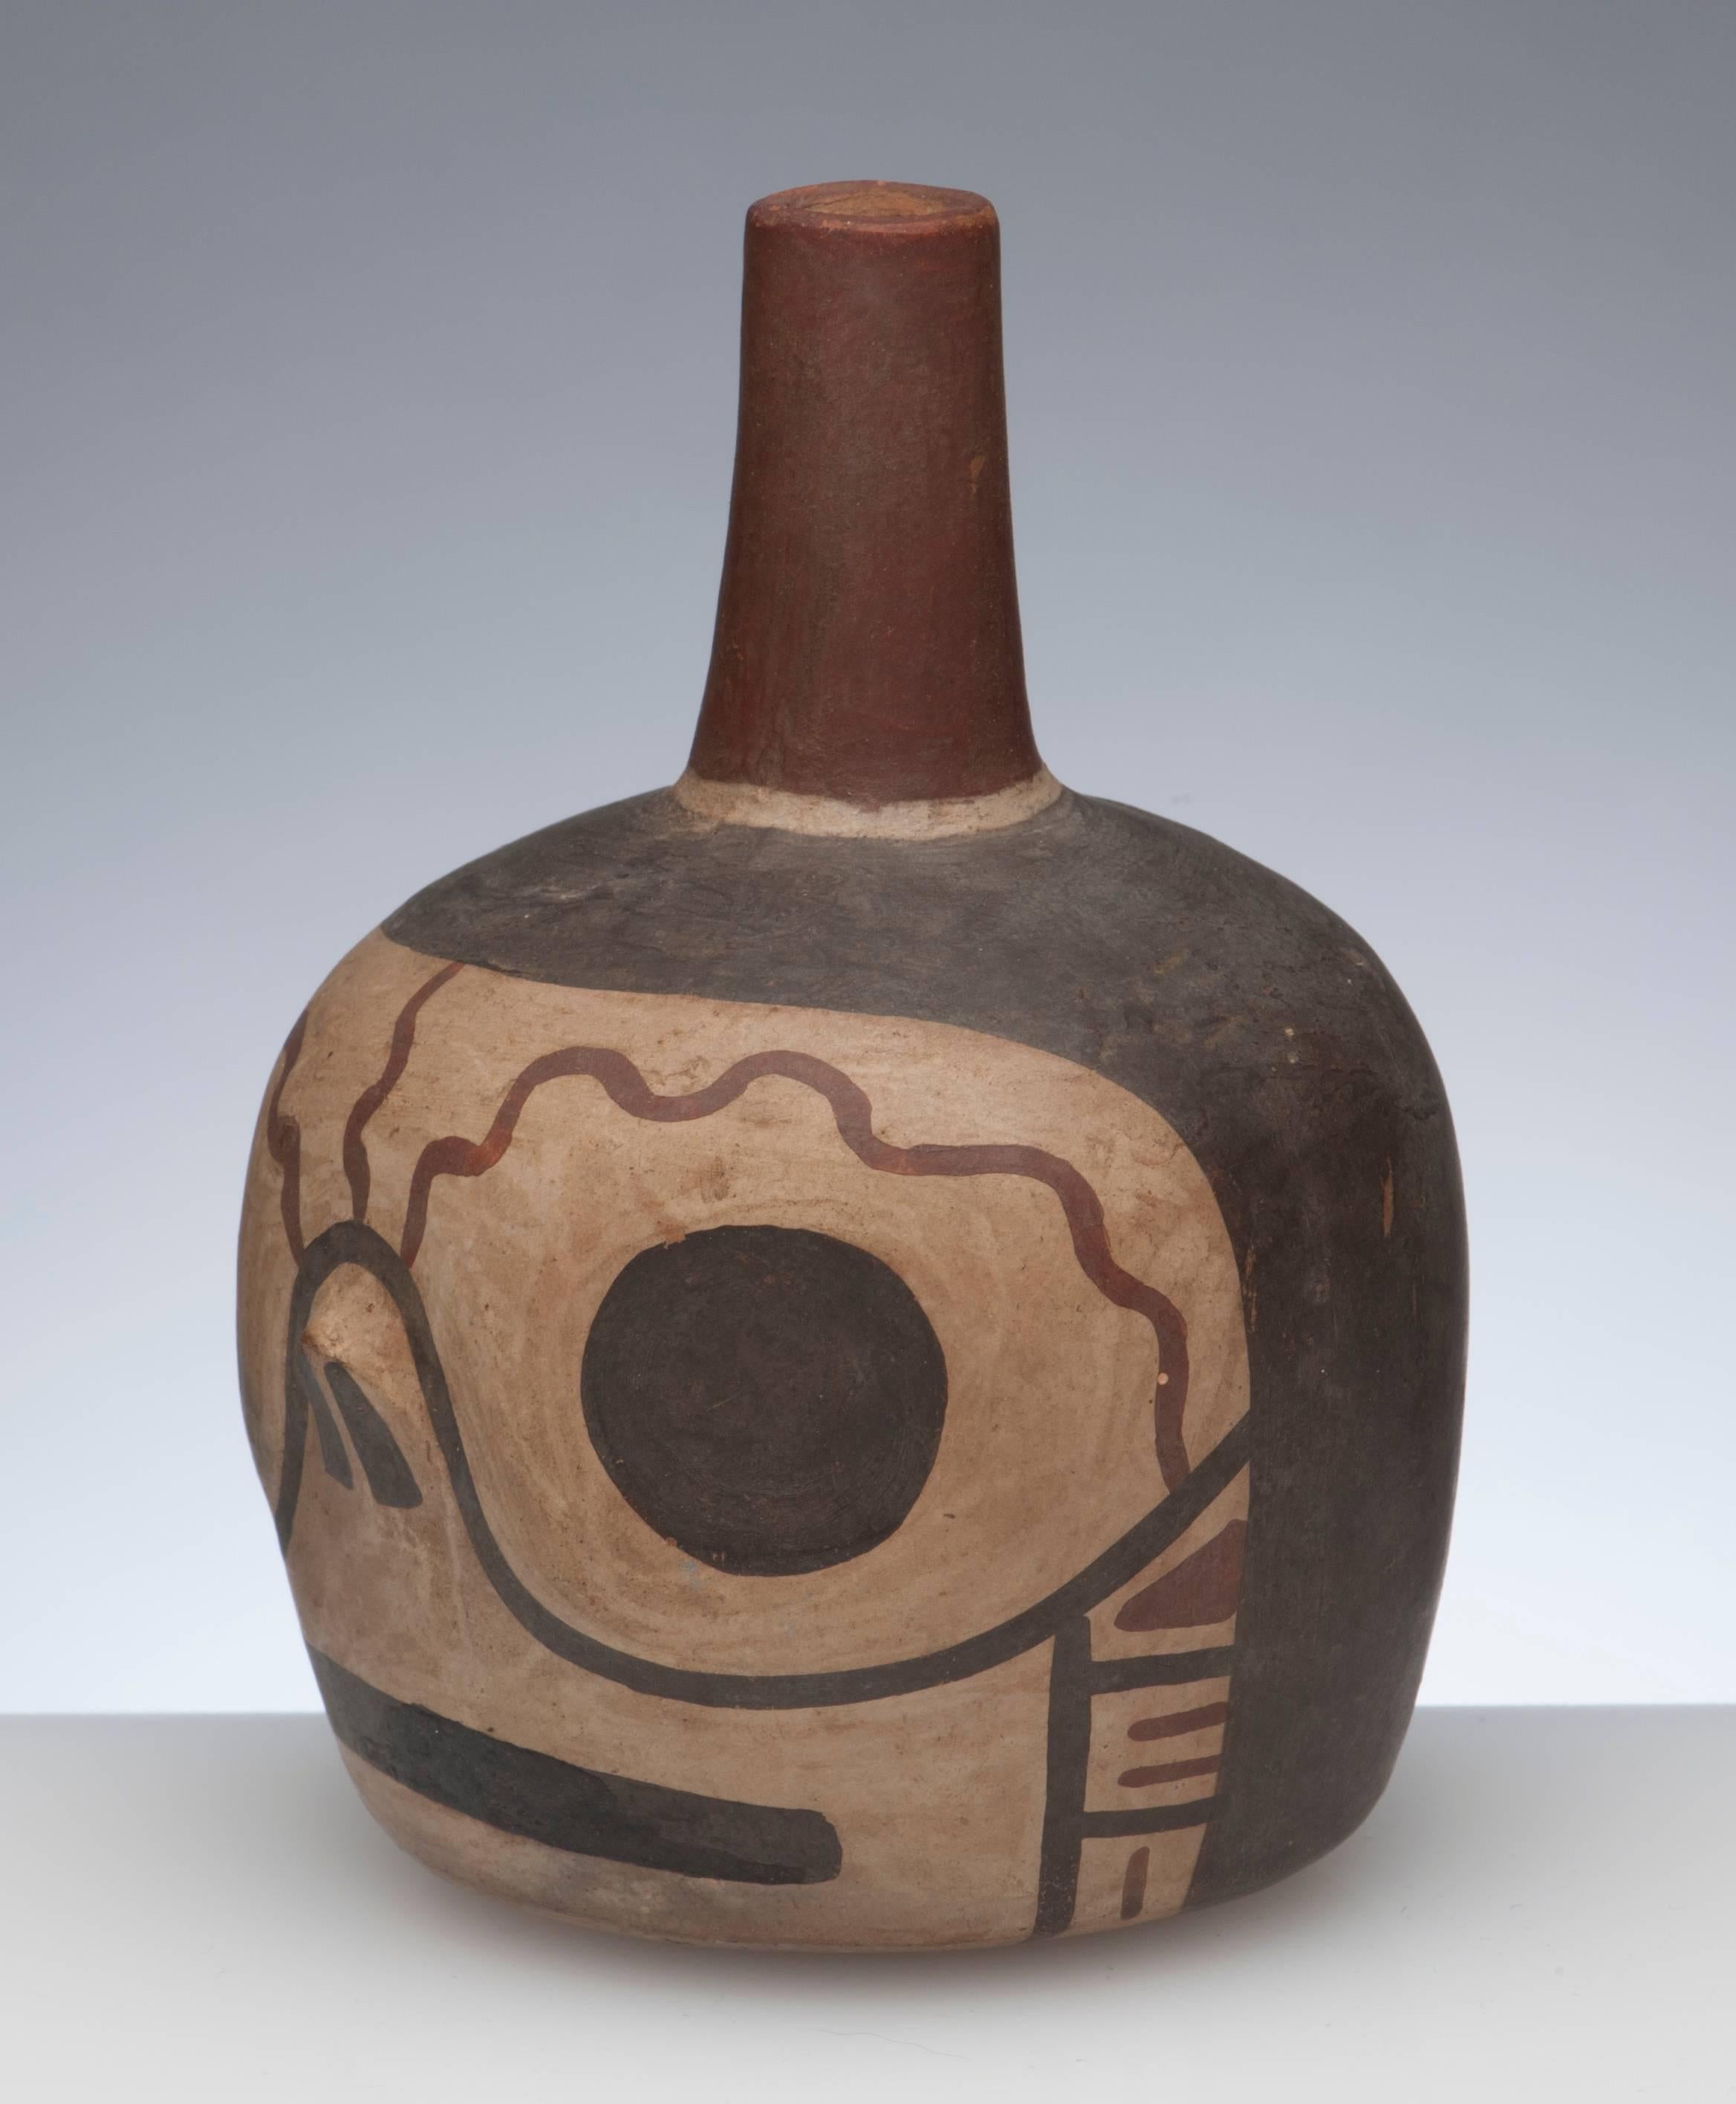 Late Nazca to early Wari (Huari) culture, circa 500-700 A.D, Peru. Near choice pottery jar from the very end of the Nazca empire. Rounded base with straight chimney spout decorated with a slightly whimsical depiction of a human skull.